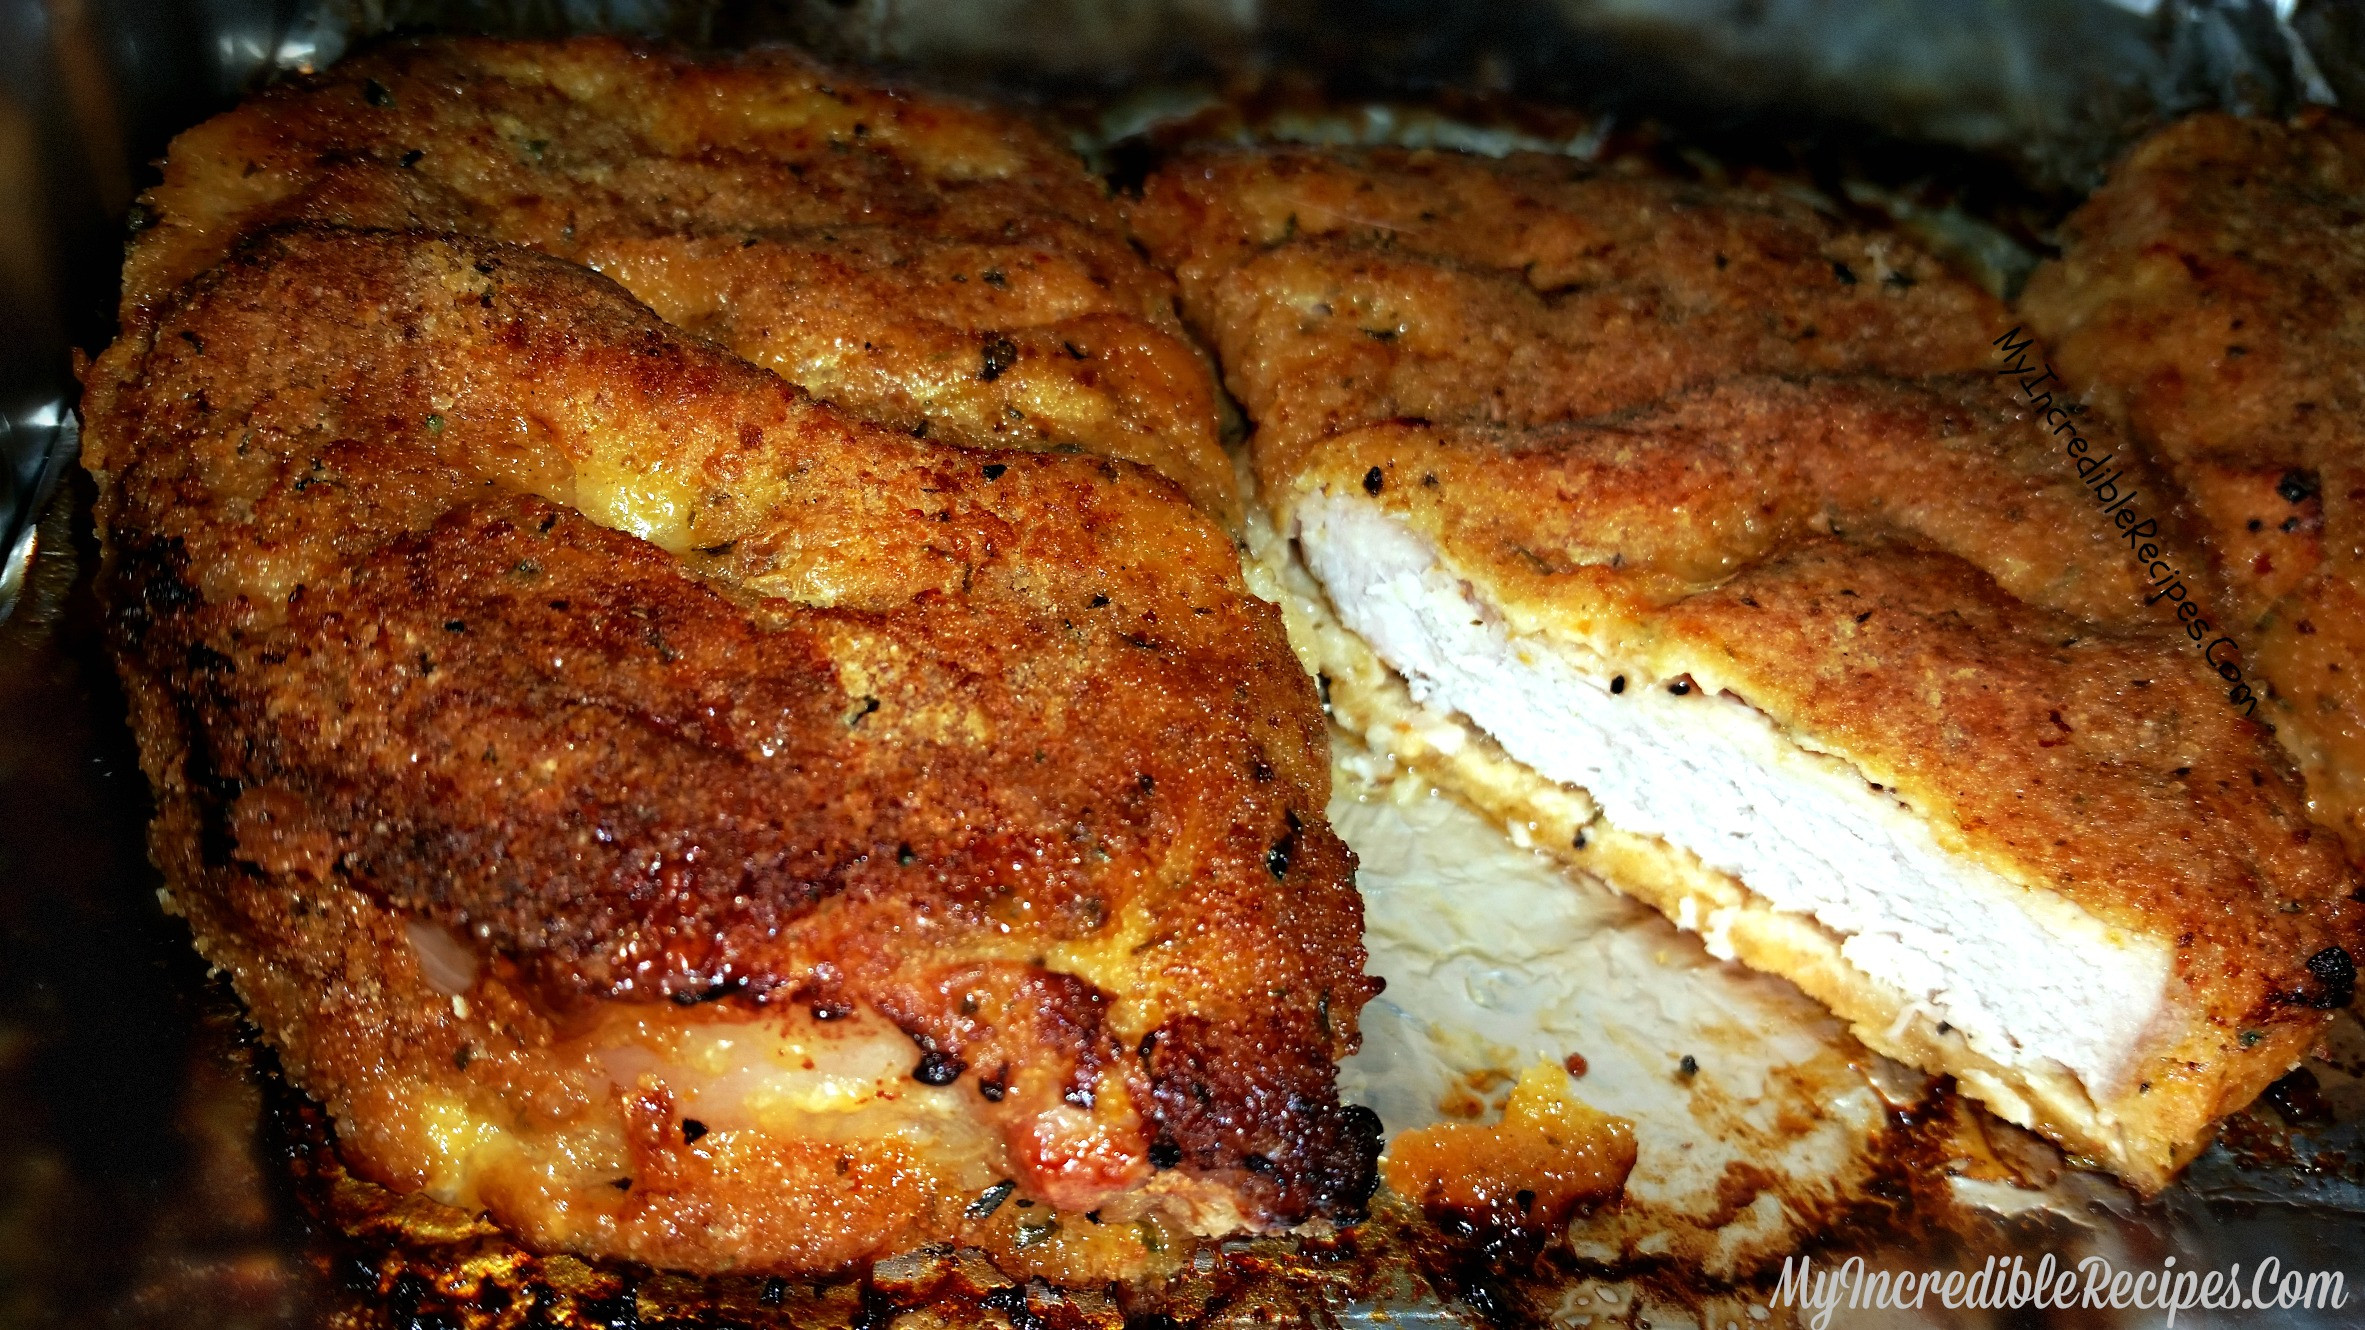 Recipes For Baked Pork Chops
 Delicious Baked Parmesan Crusted Pork Chops